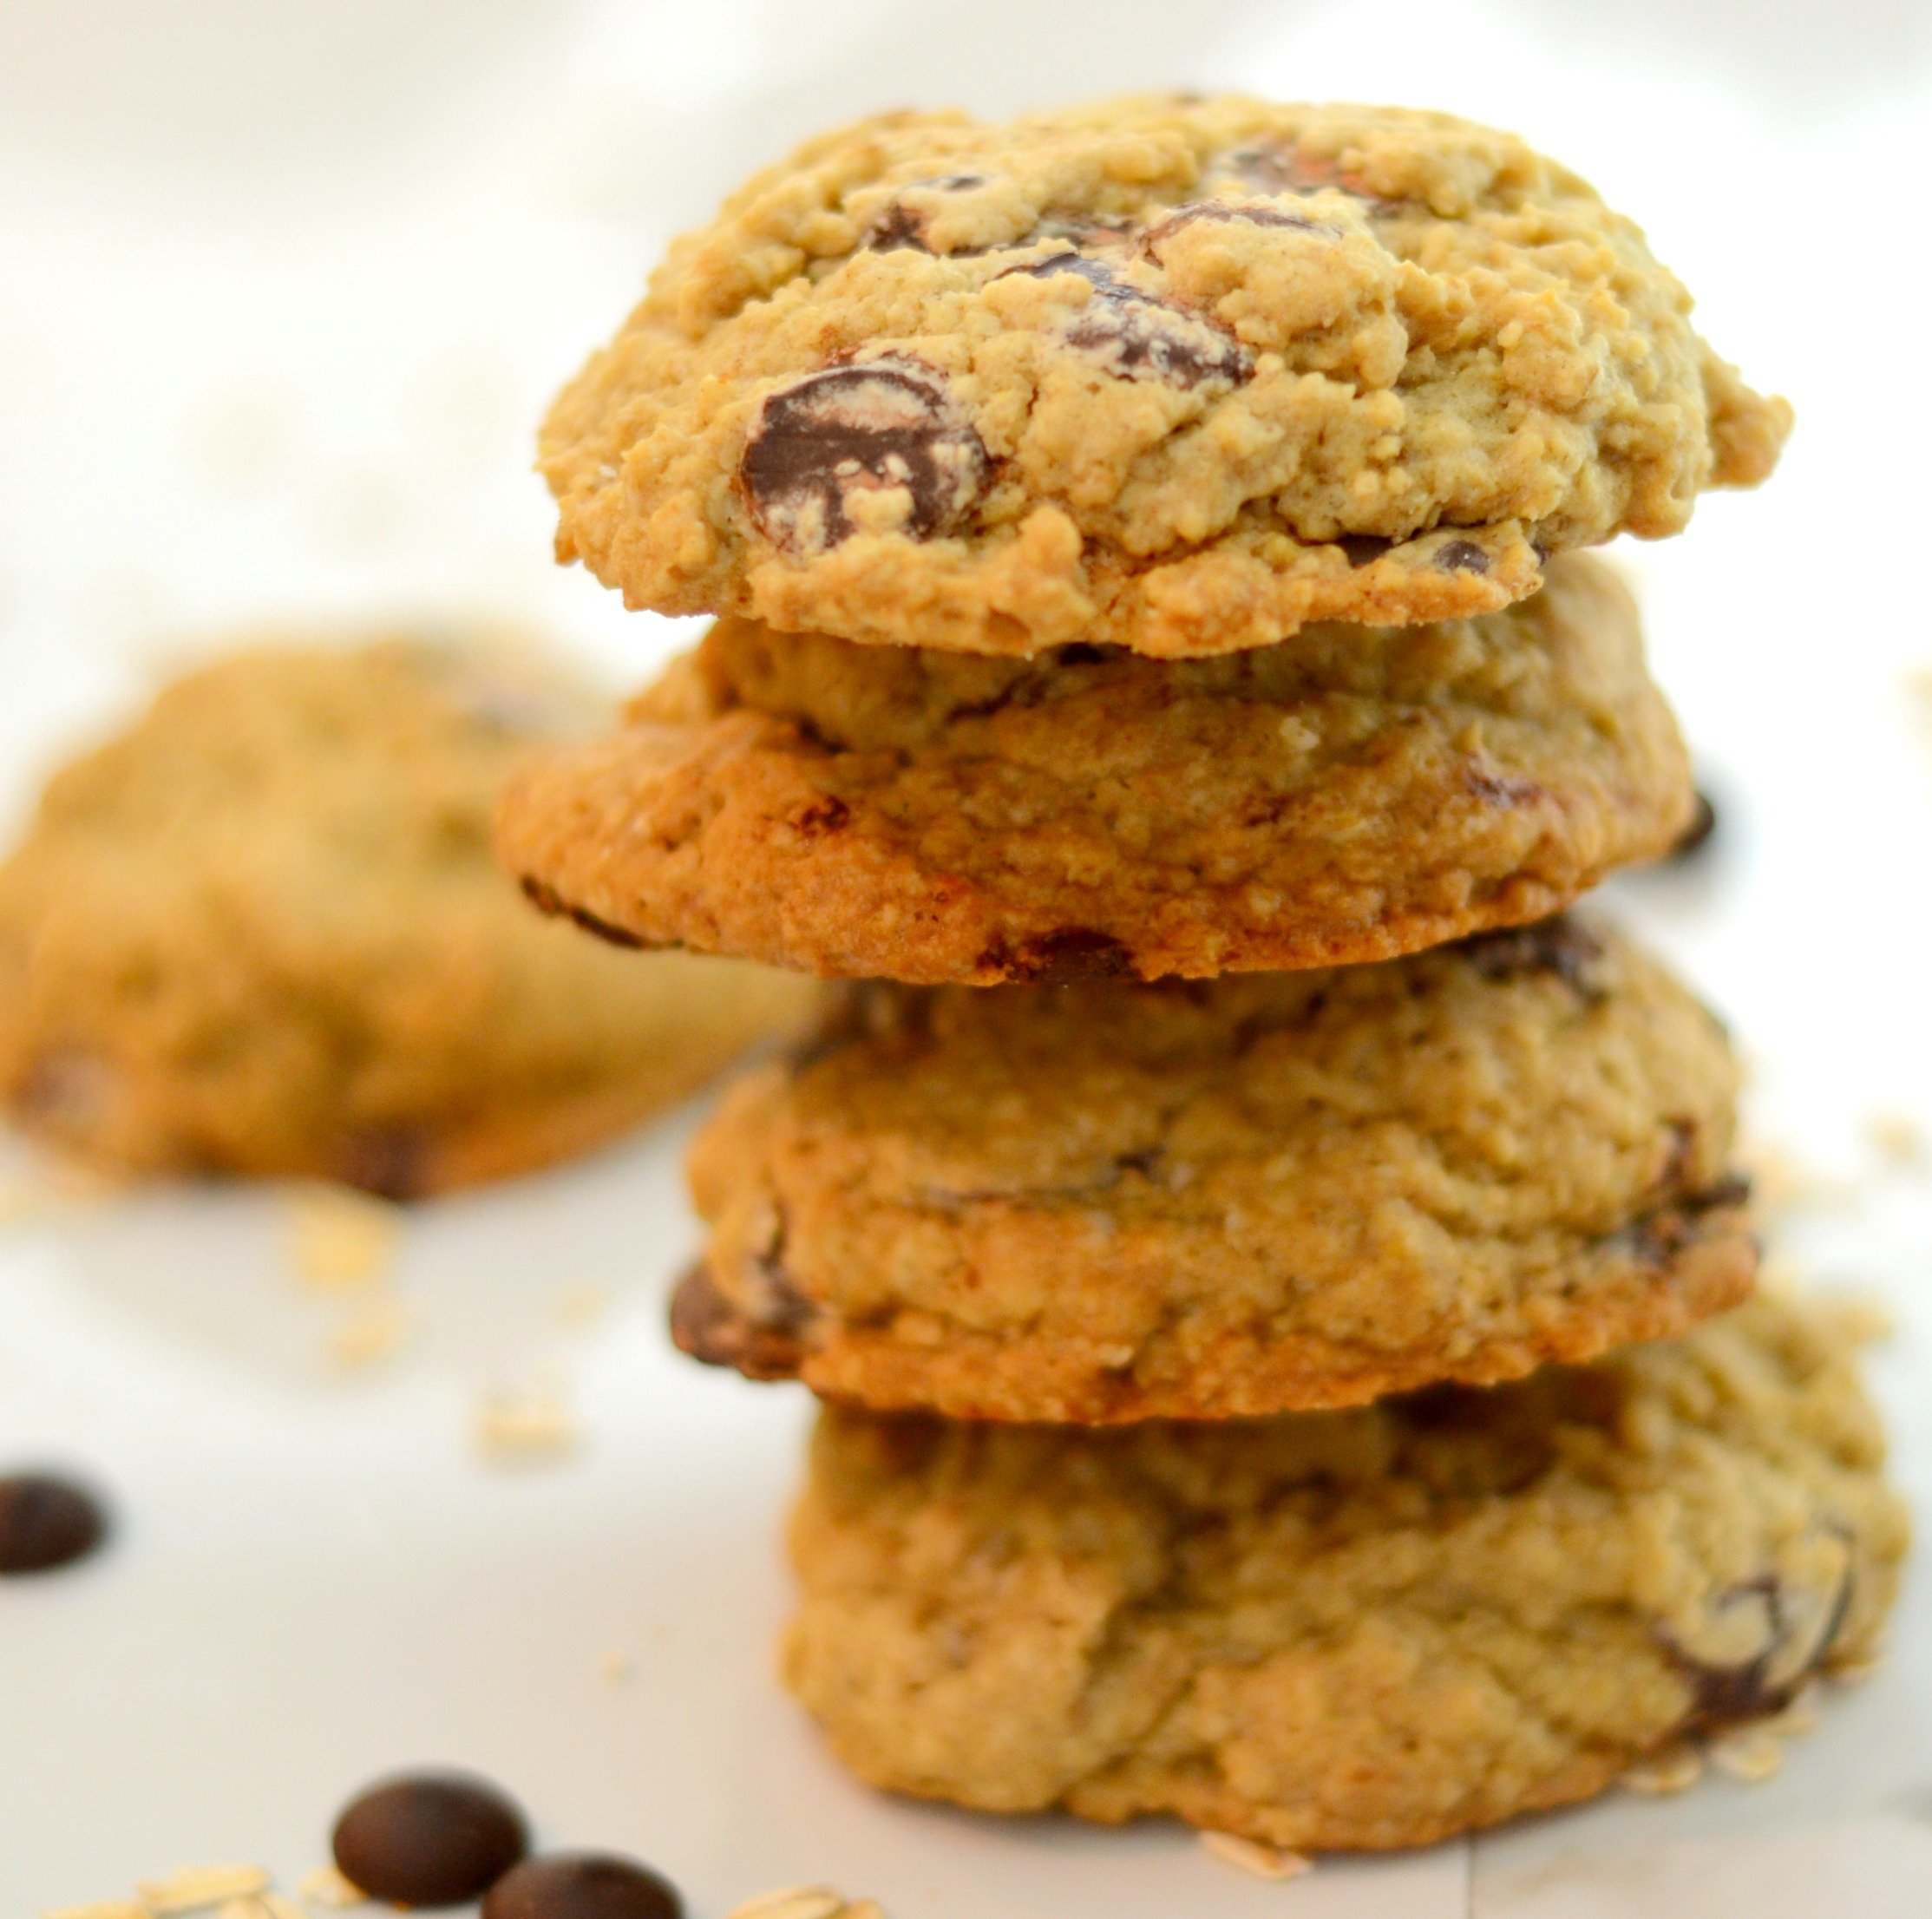 A stack of oatmeal chocolate chip cookies aganist a white background with a few chocolate chips and oats sprinkled in the foreground